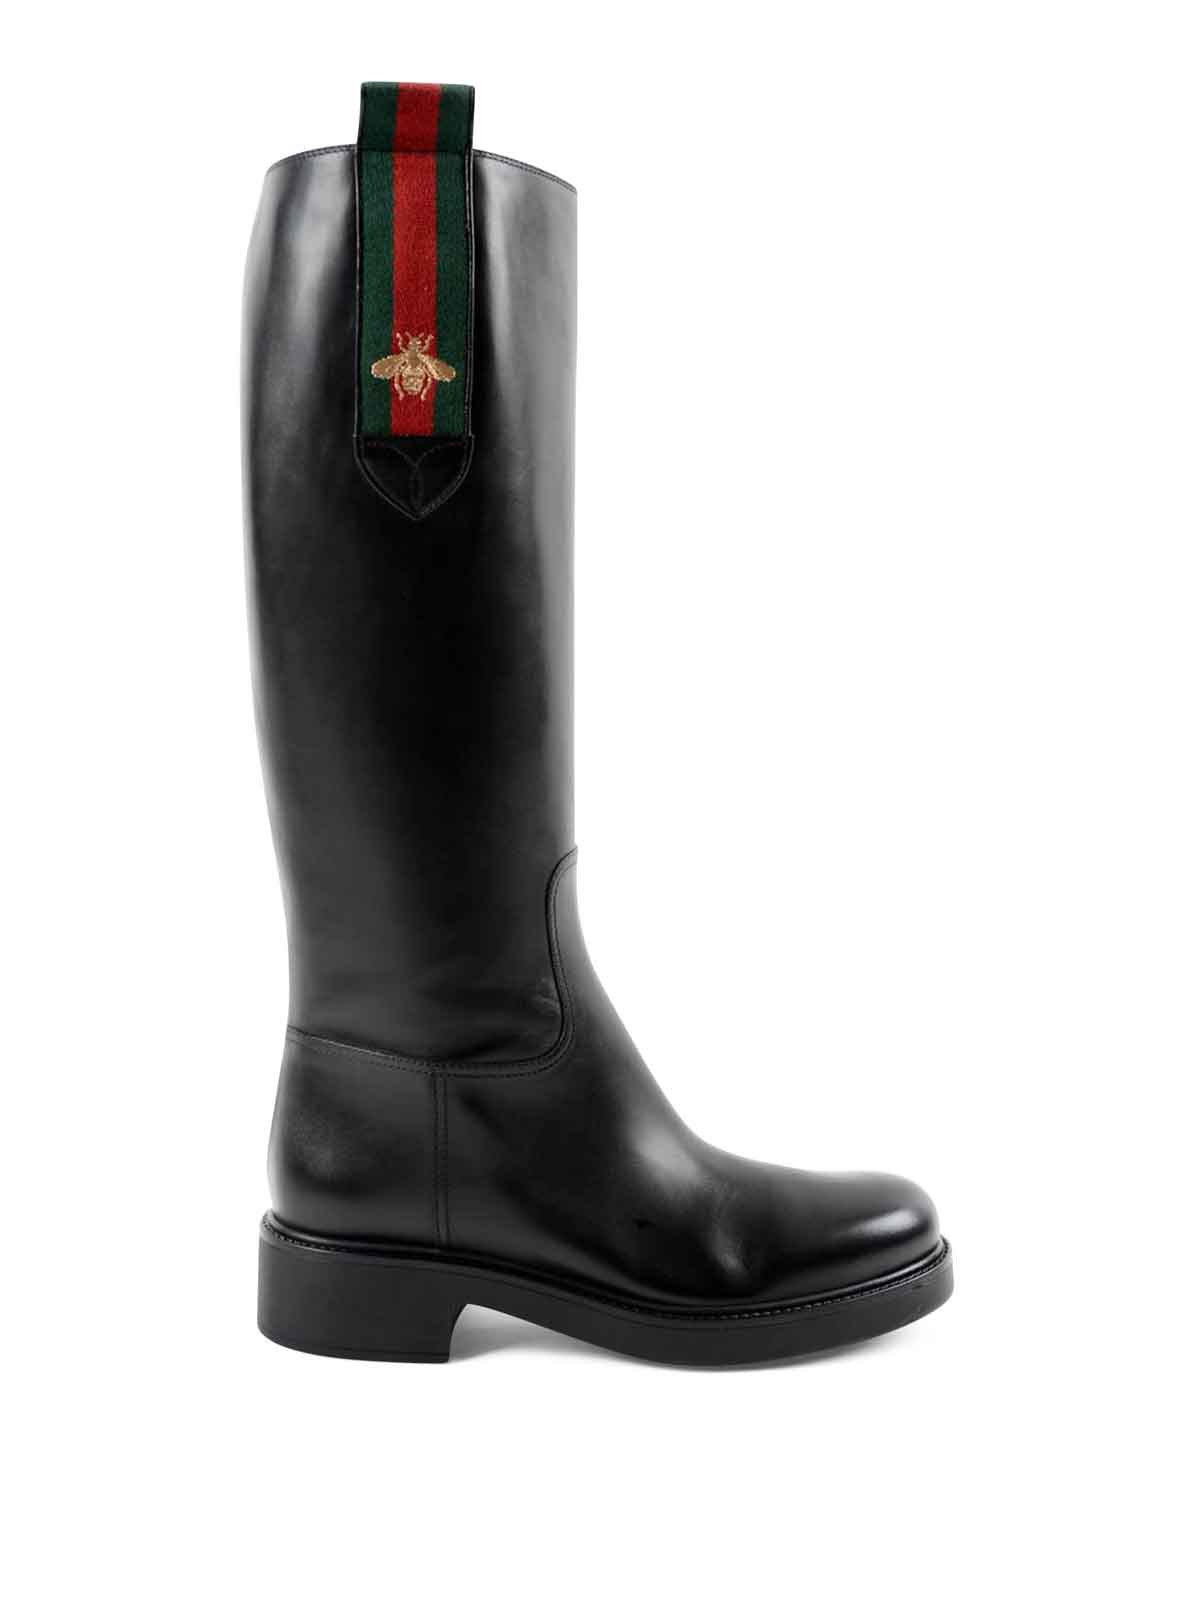 Gucci - Betis boots - boots - 435539DKHC0 1060 | Shop online at iKRIX